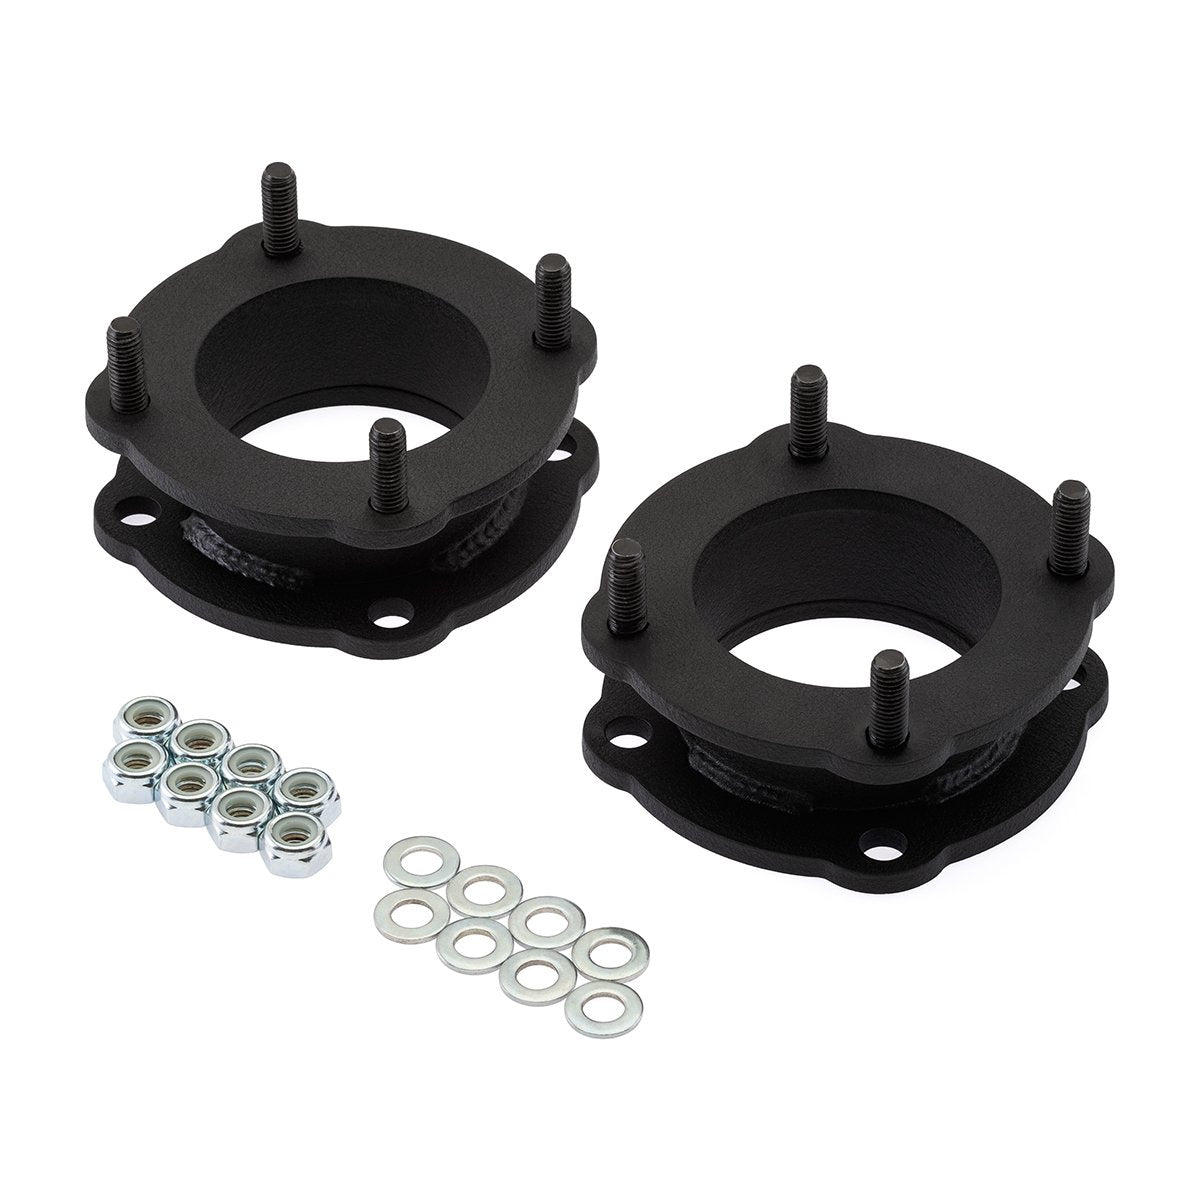 2007 - 2020 TOYOTA TUNDRA Full Front Spacers + Rear Steel Shackle Lift Kit Diff Drop